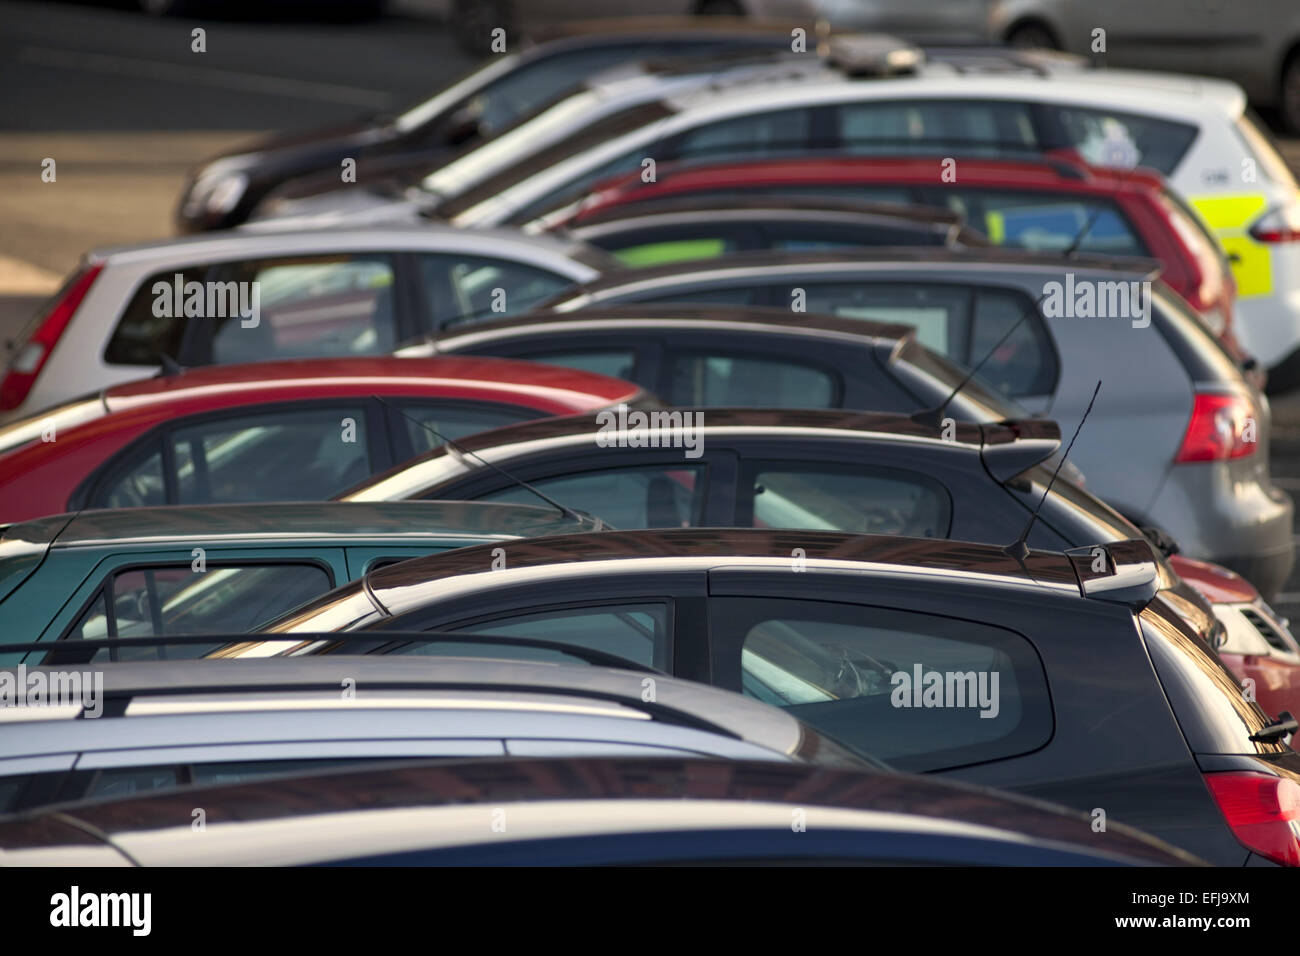 Cars in car park at retail park Stock Photo